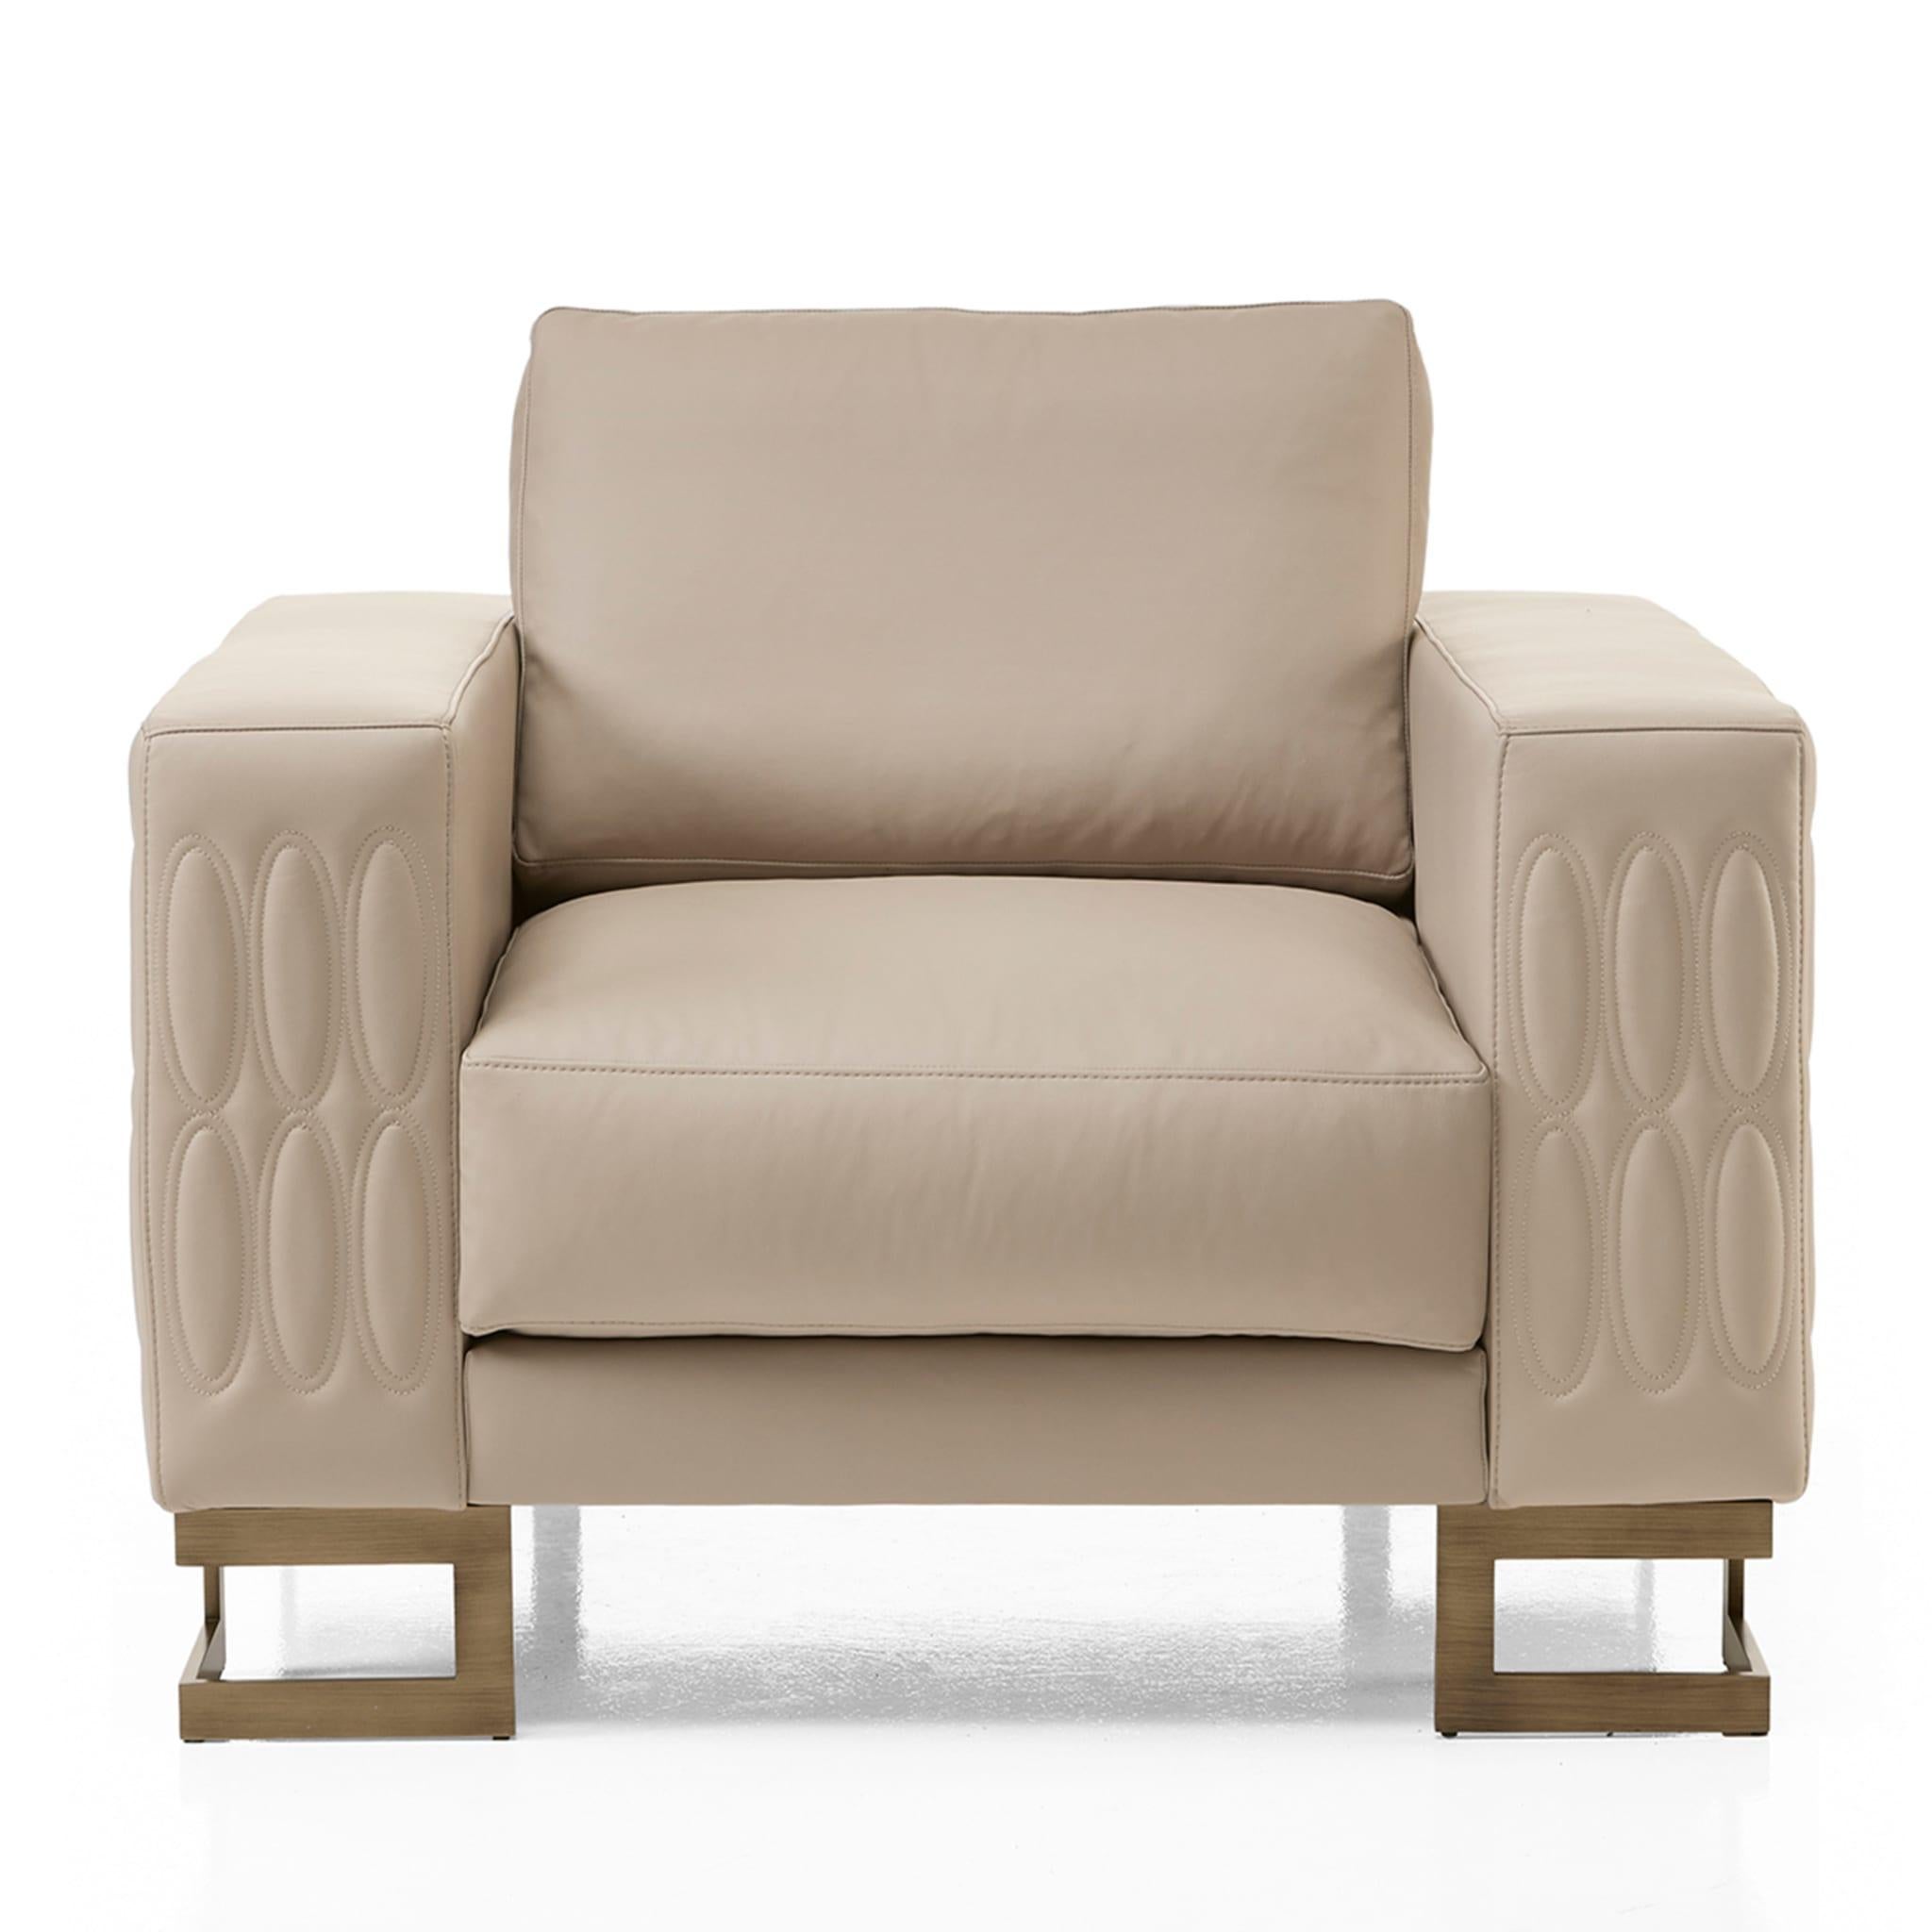 Zaffiro Square-Based Beige Armchair In New Condition For Sale In Milan, IT